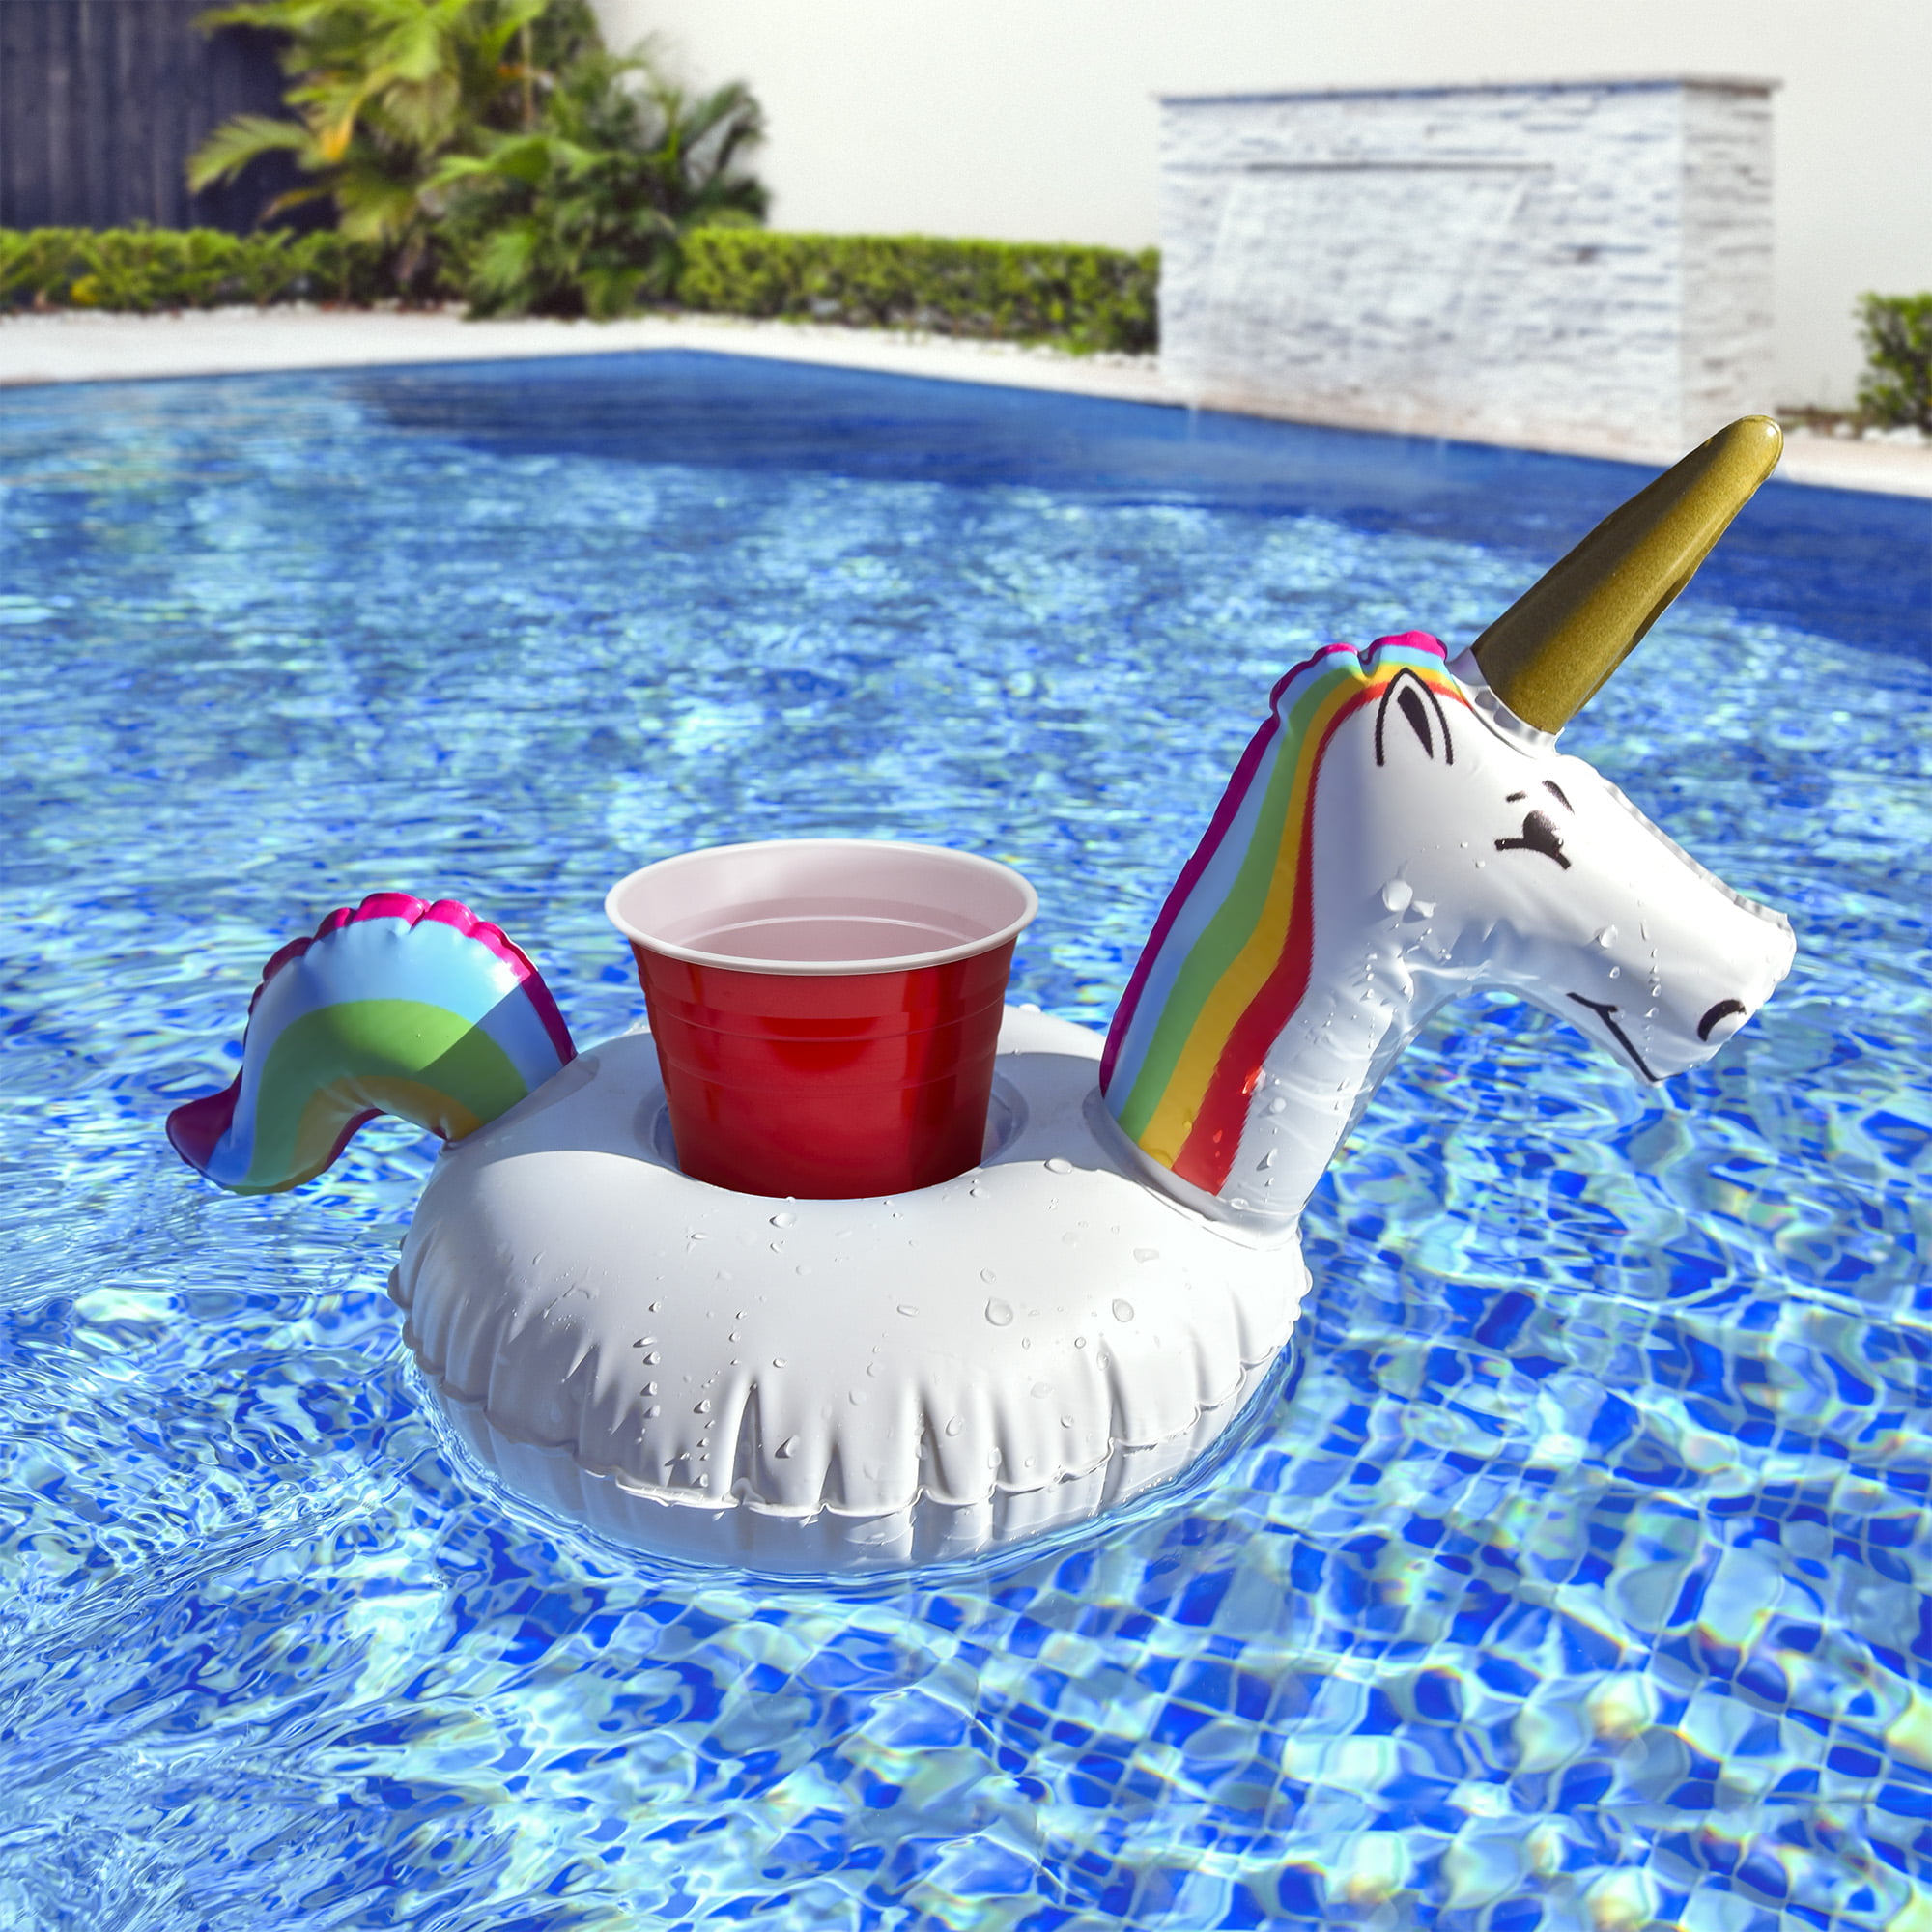 GoFloats Inflatable Unicorn Drink Holder (3 Pack), Float your drinks in style